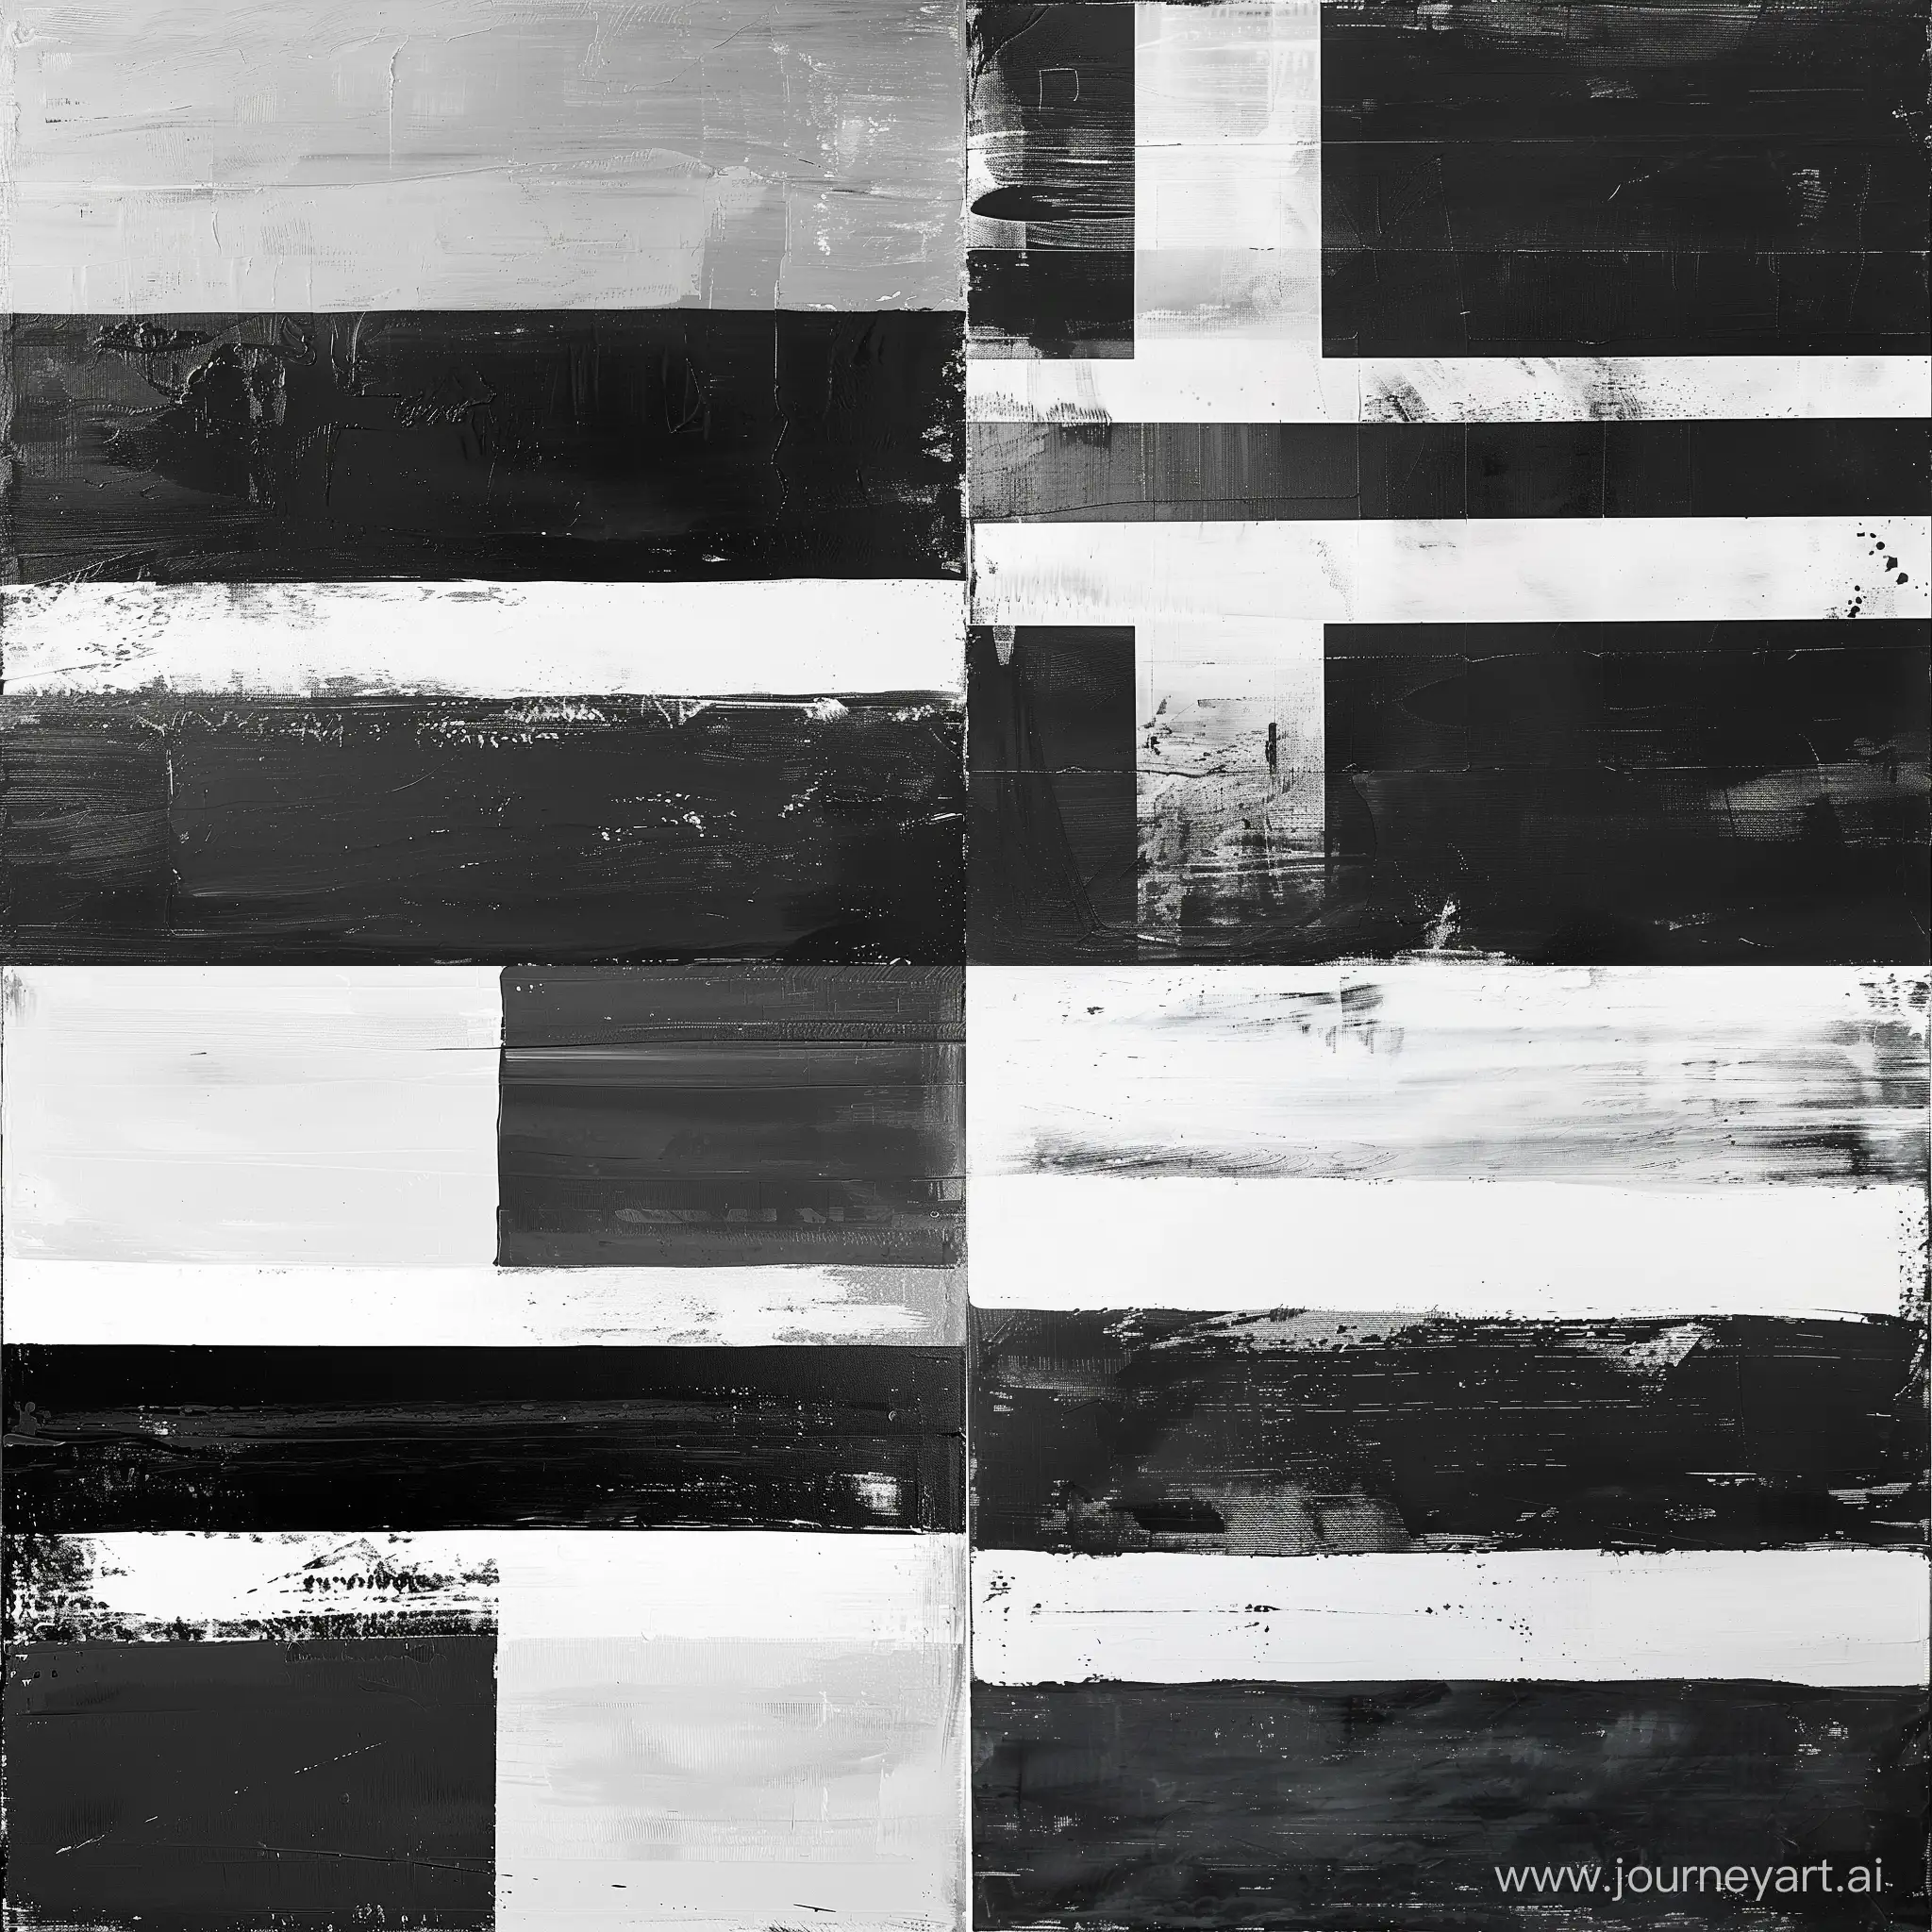 Abstract-Horizontal-Rhythm-in-Striking-Black-and-White-Composition